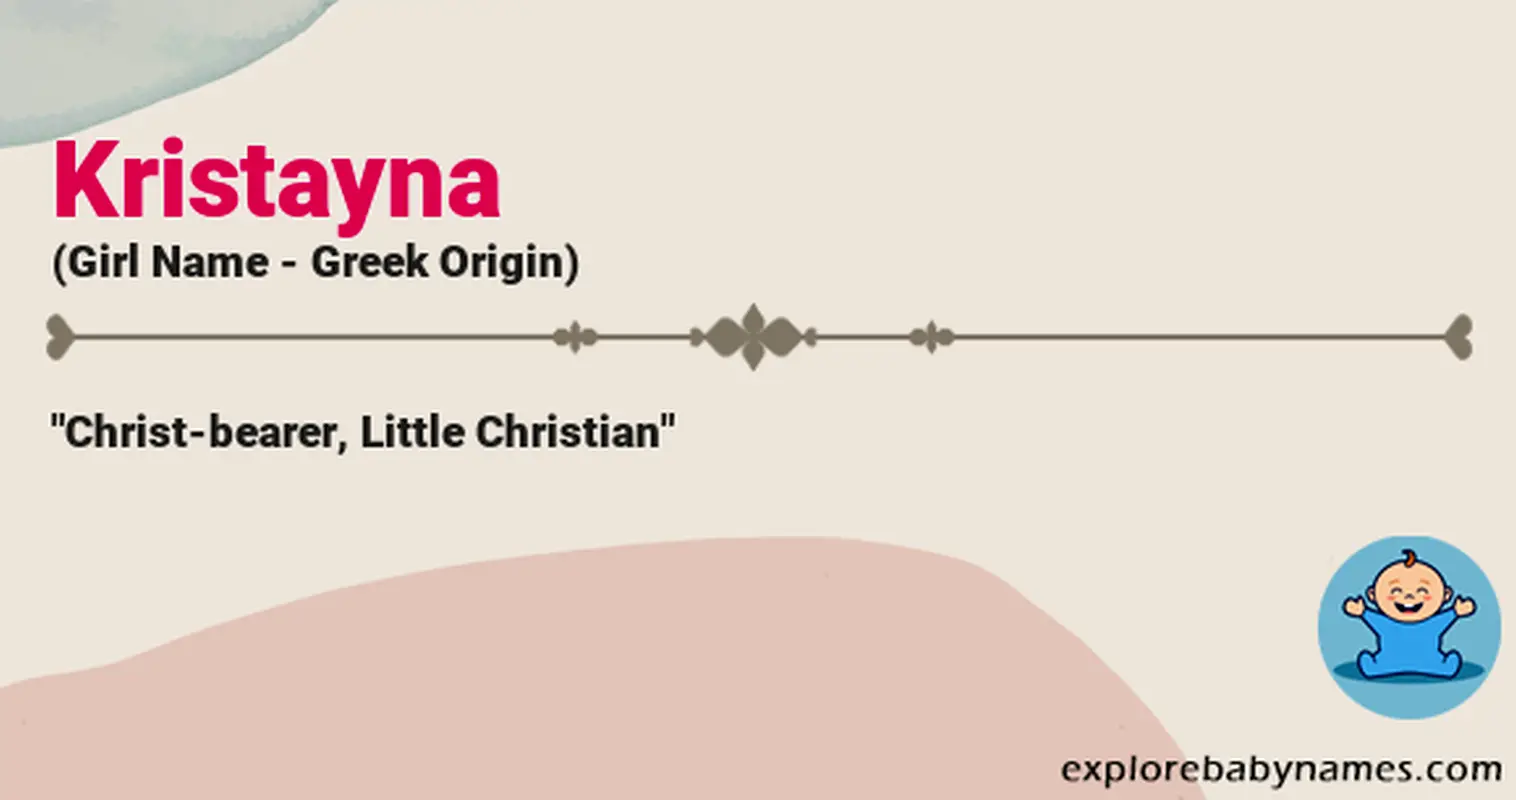 Meaning of Kristayna